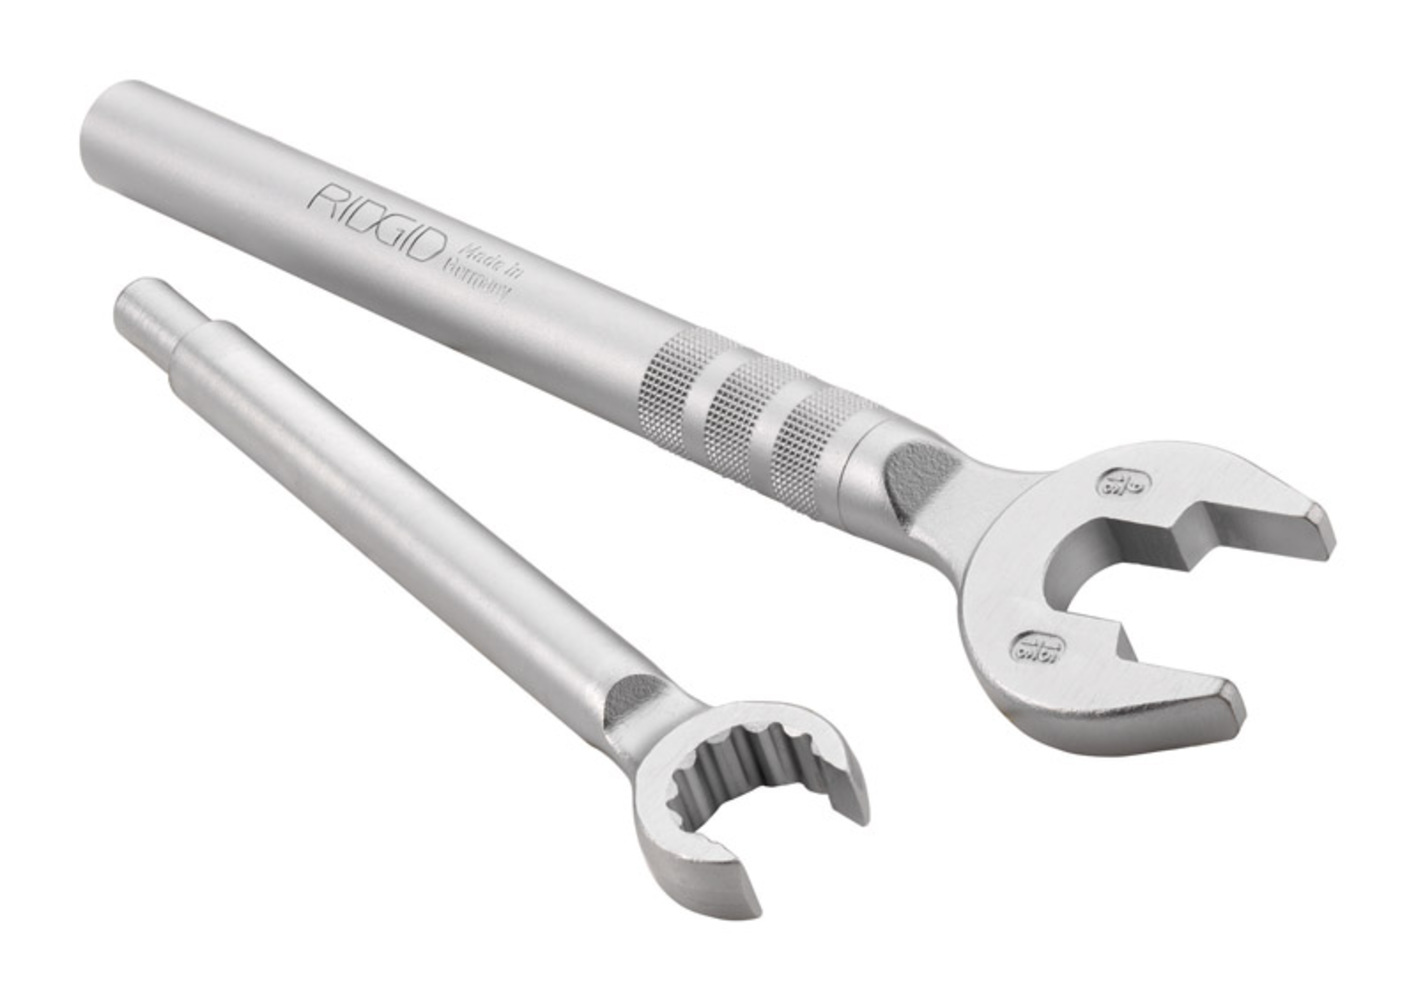 Ridgid One-Stop Wrench - image 2 of 2